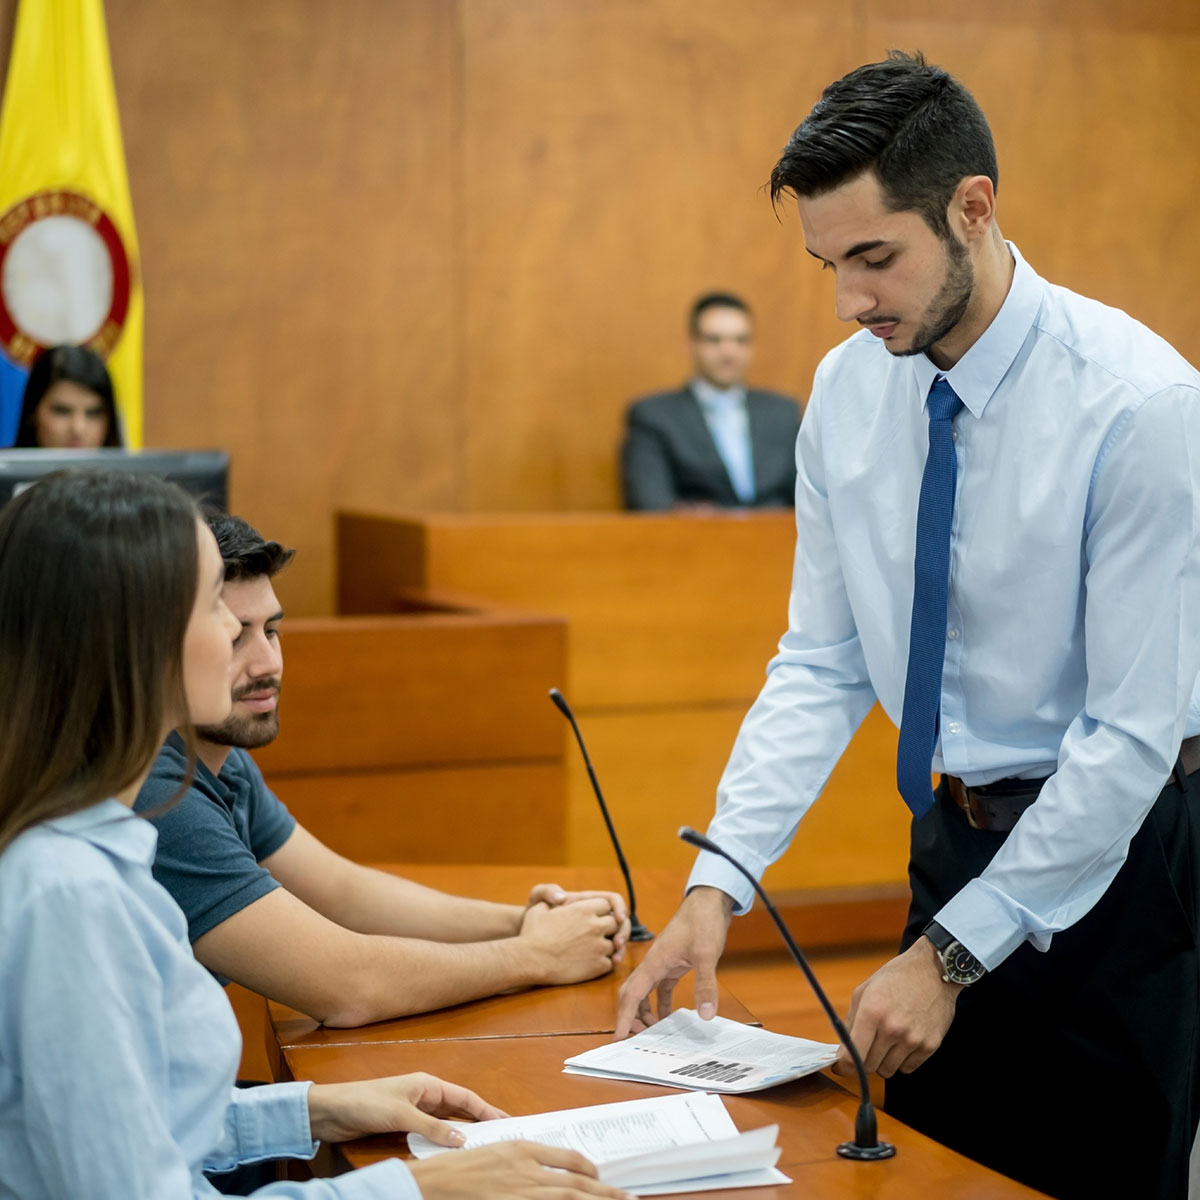 students taking part in a mock trial in a courtroom